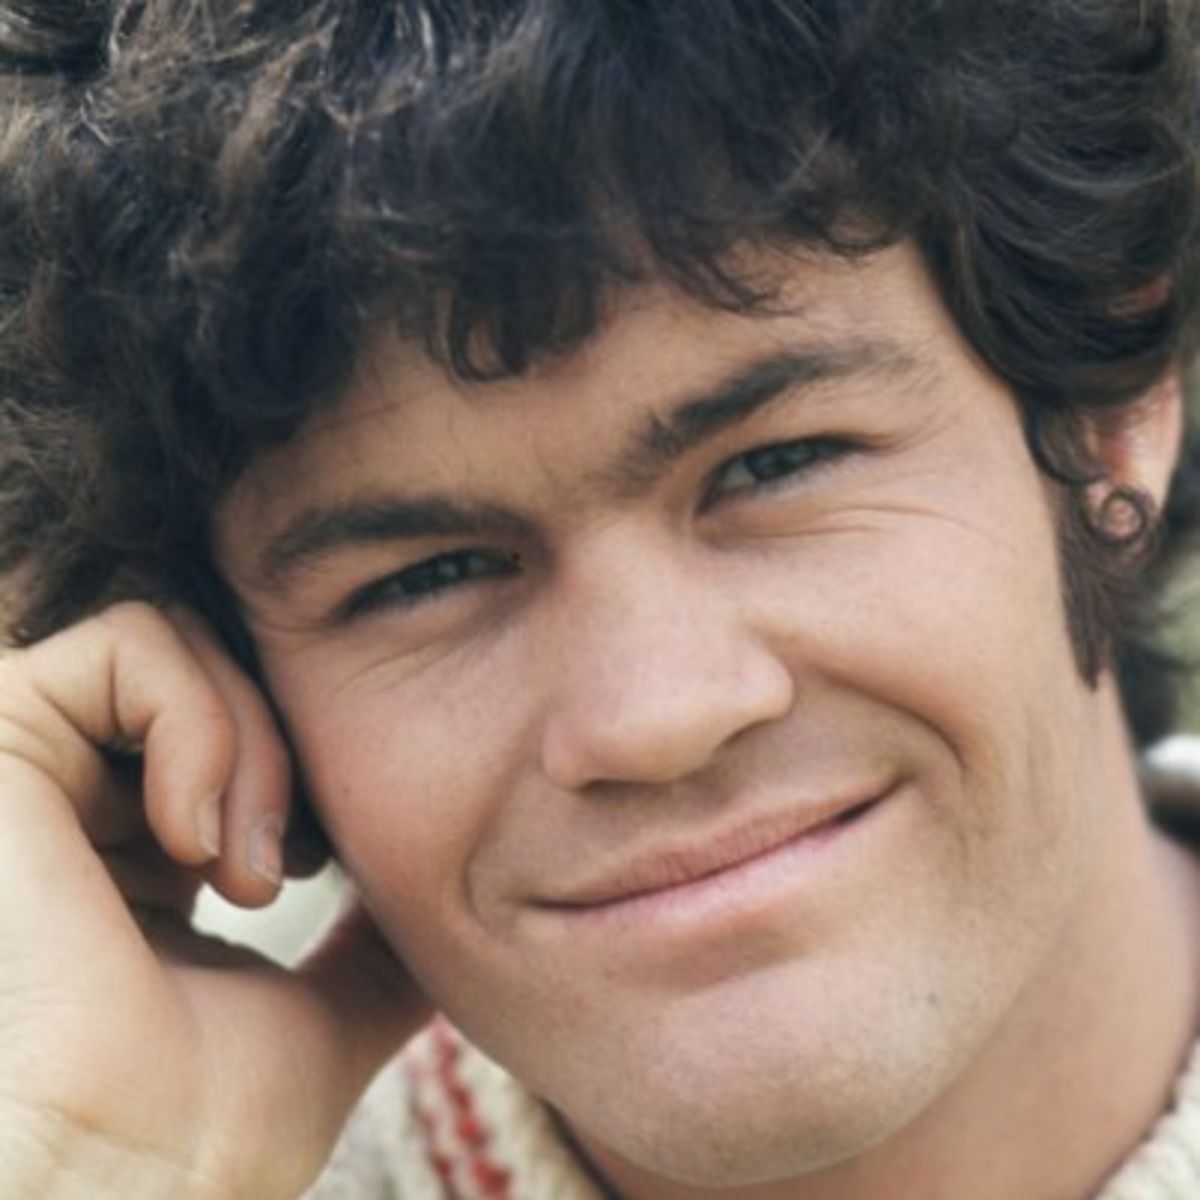 images-of-micky-dolenz